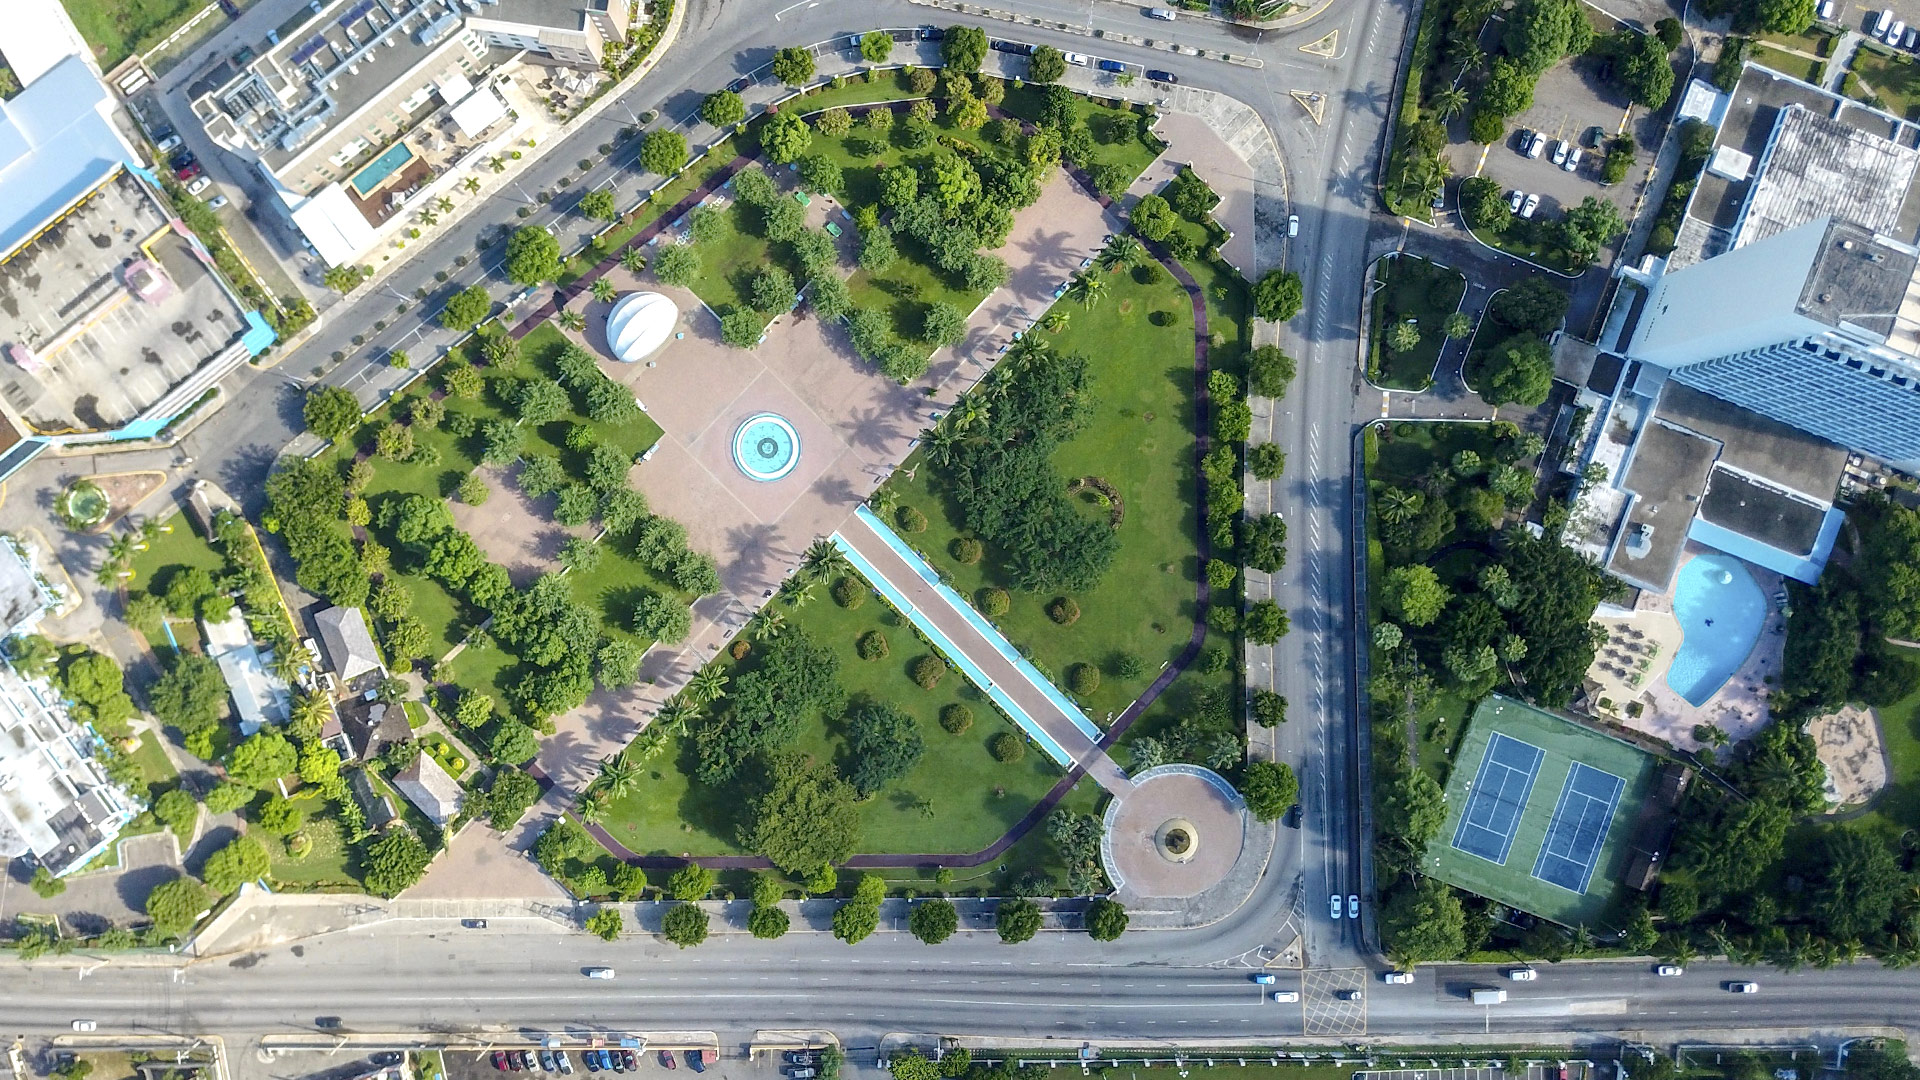 Photo from above showing a park and roads